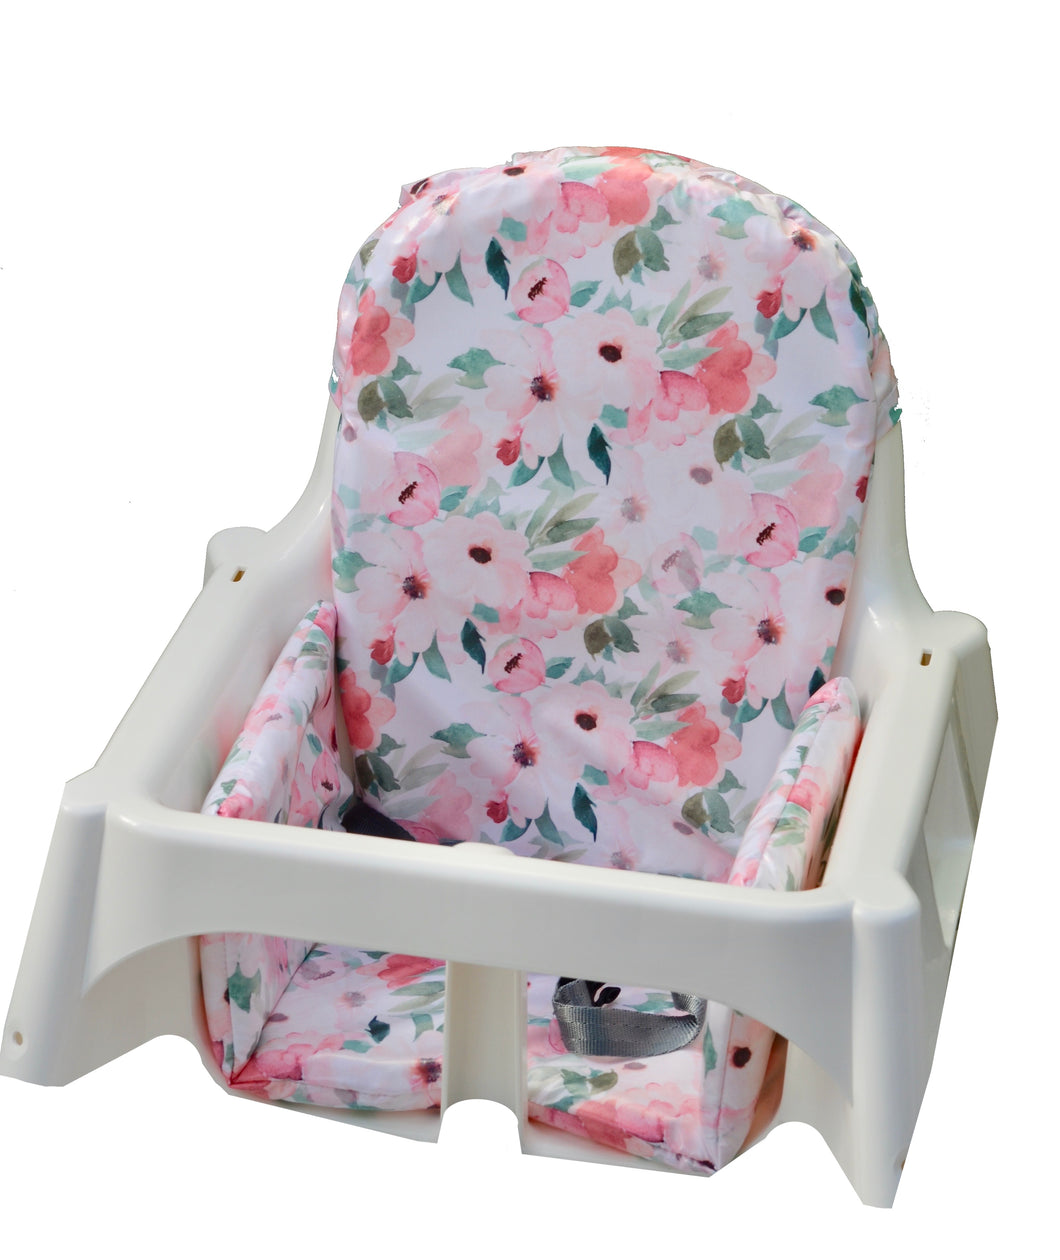 High Chair Liner - Soft Floral